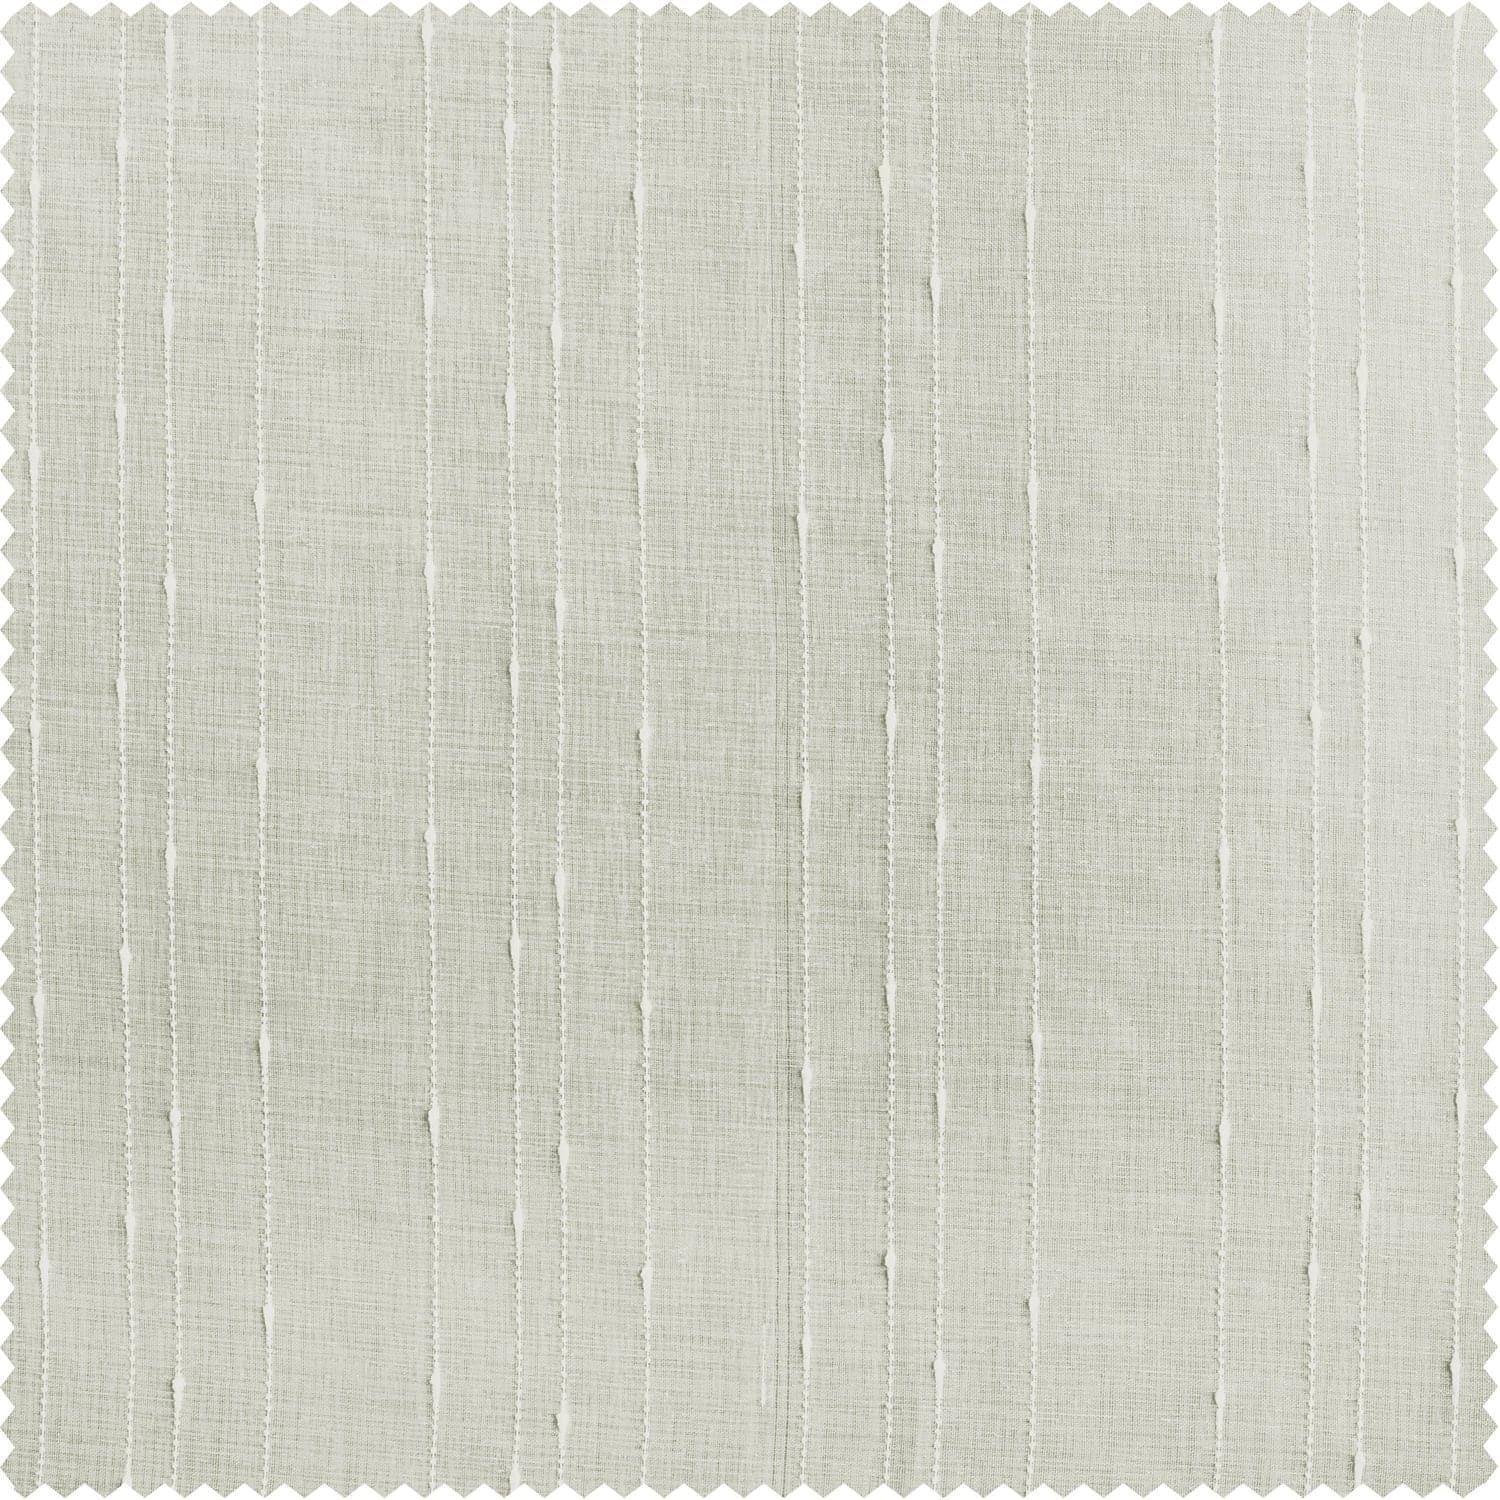 Montpellier Striped Patterned Faux Linen Sheer Curtain